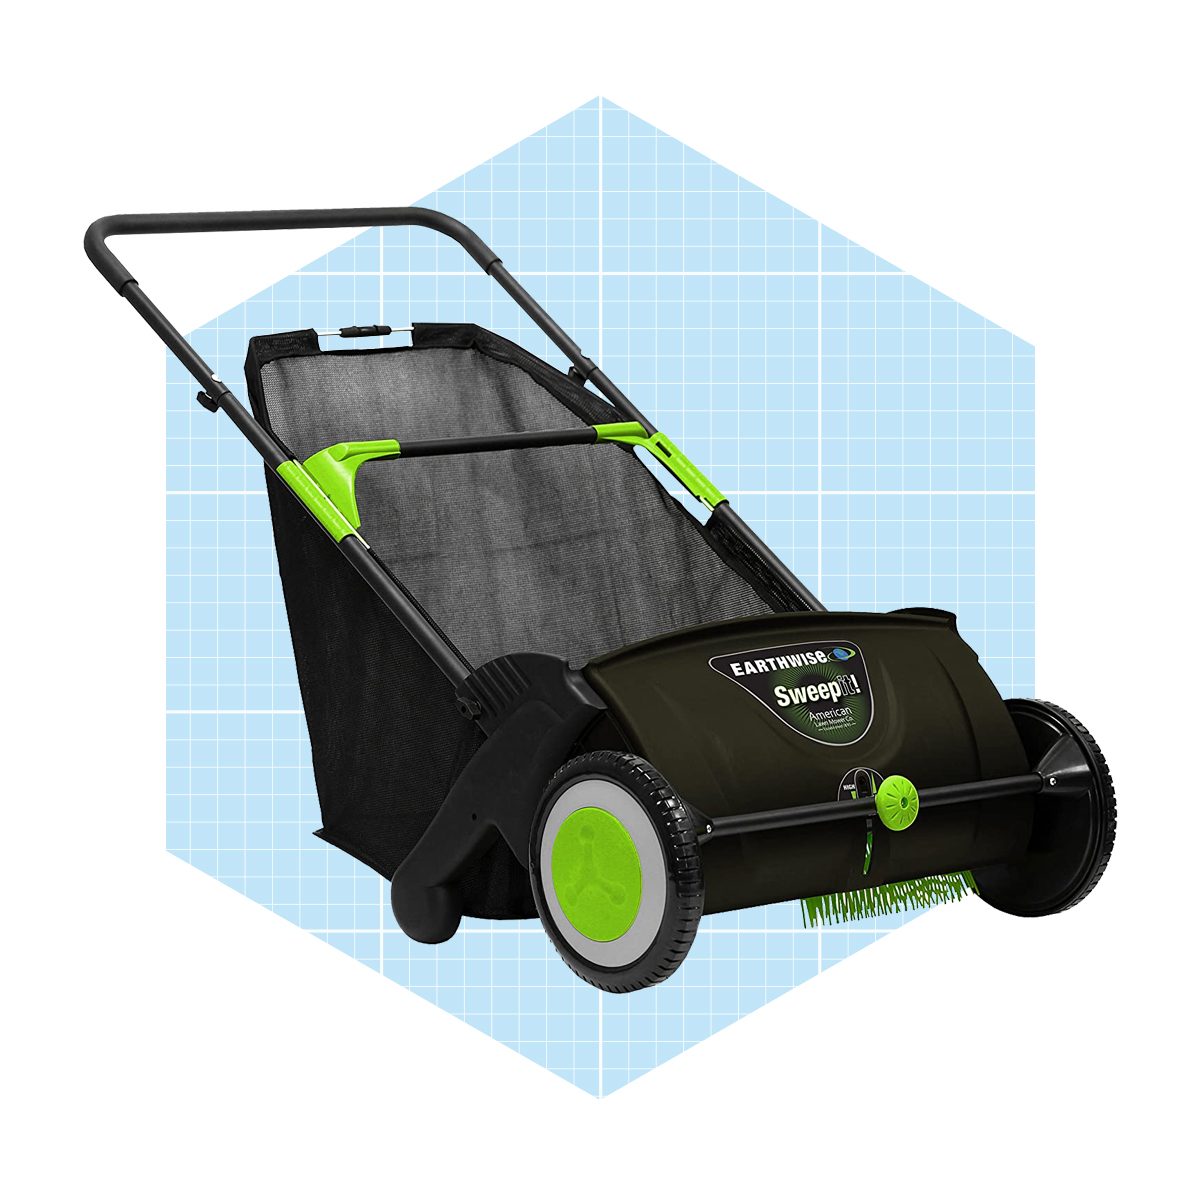 Earthwise Leaf & Grass Push Lawn Sweeper Ecomm Amazon.com